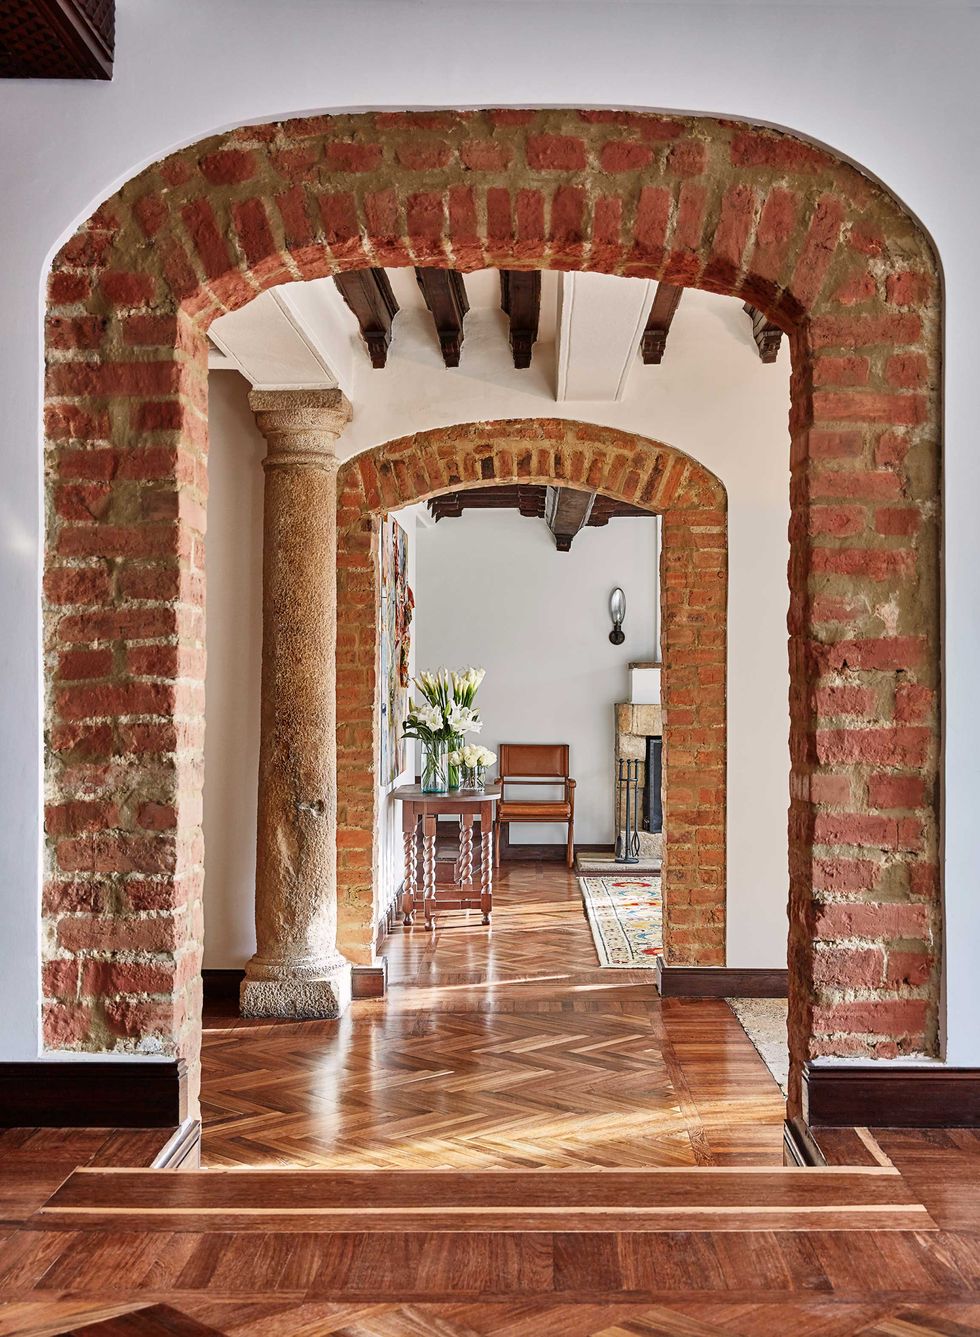 an interior view of a hotel common area through an exposed brick archway